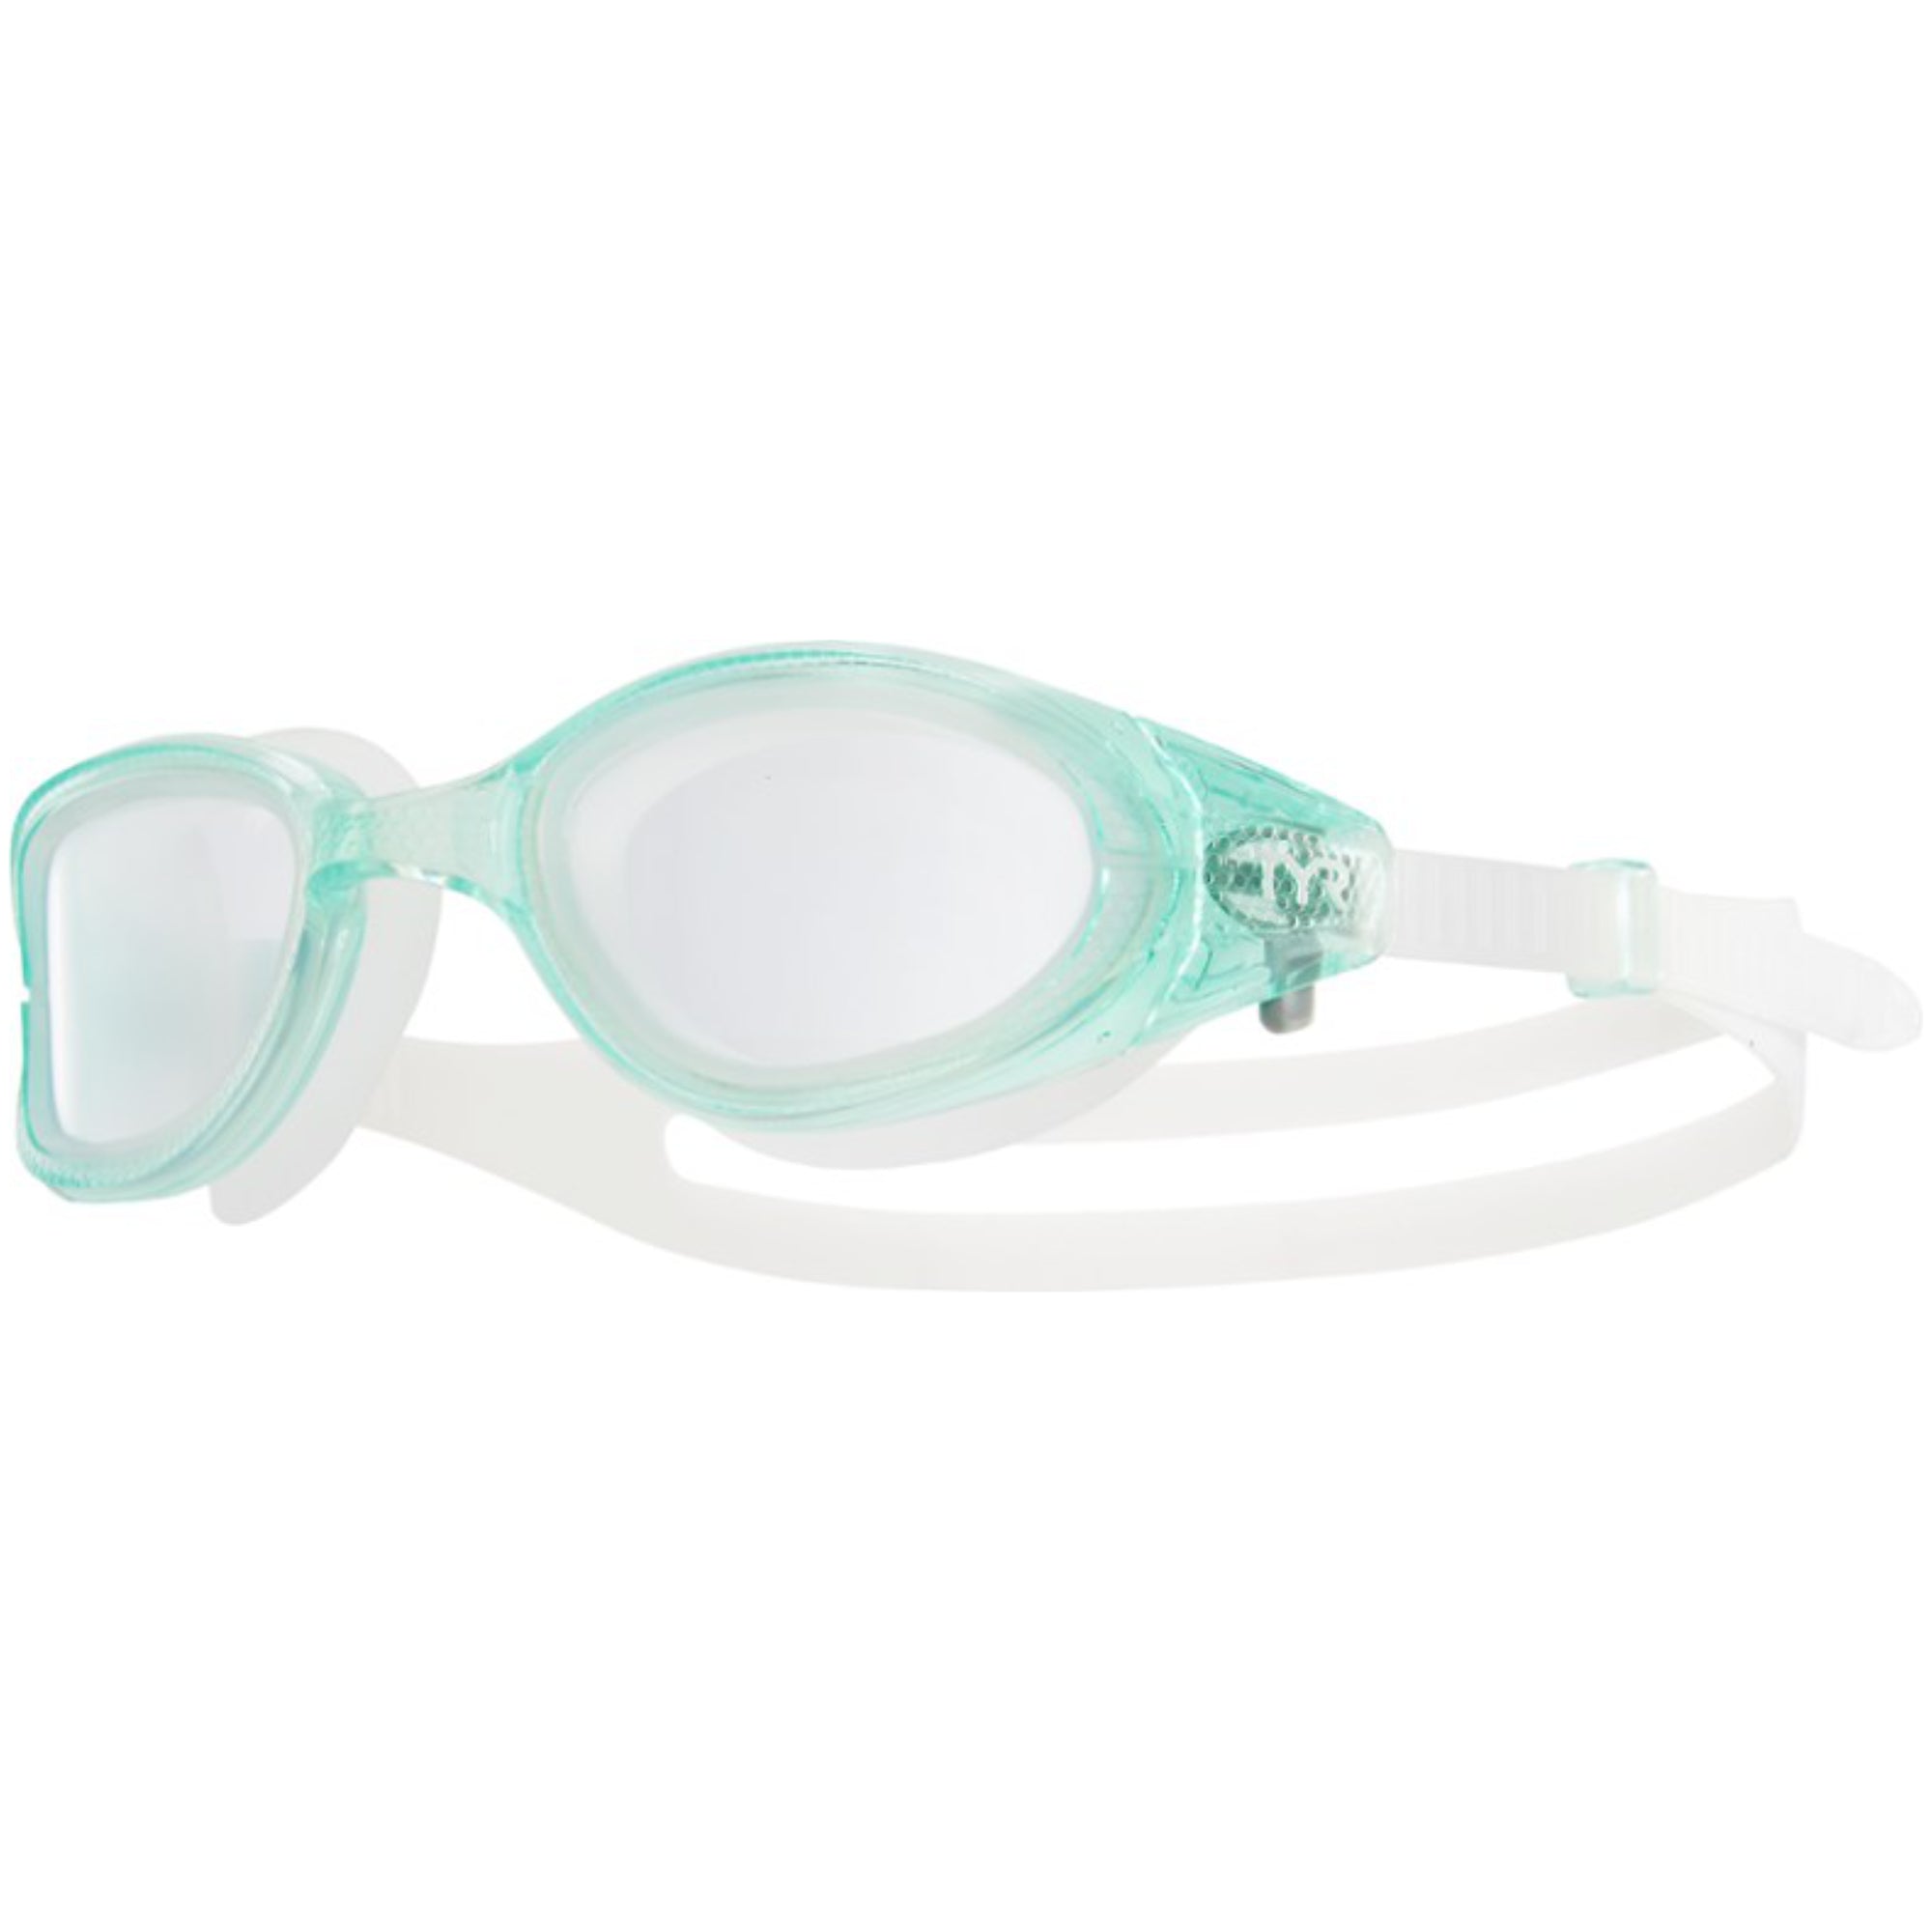 TYR Special Ops 3.0 Femme Transition Swim Goggles - Women's